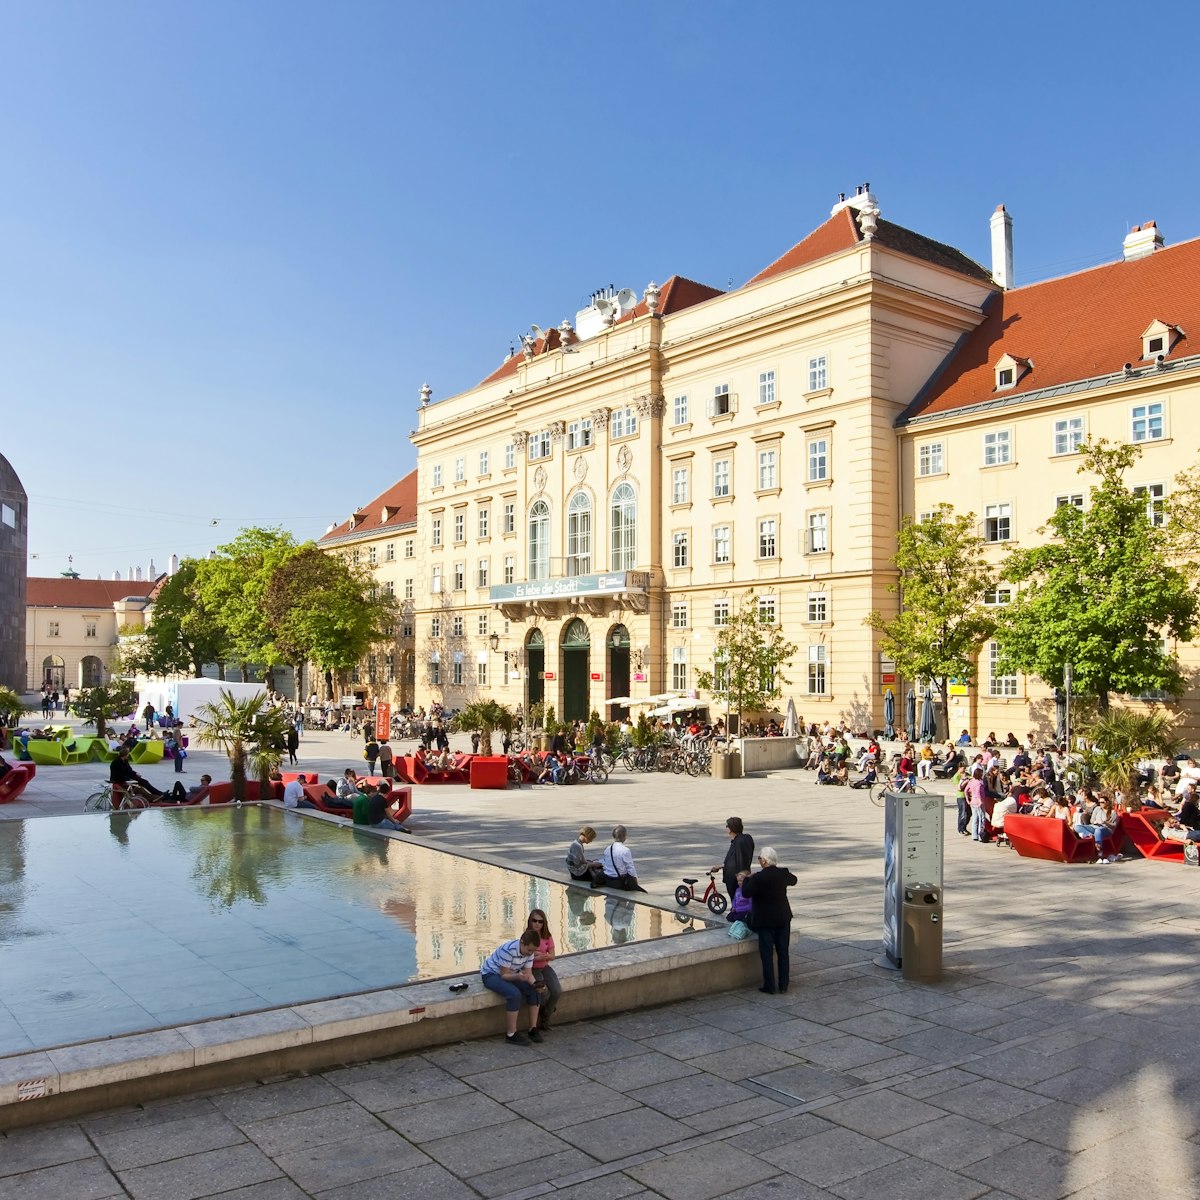 VIENNA, AUSTRIA - APRIL 19: Many people enjoy a sunny afternoon at the Museumsquartier on April 19, 2011 in Vienna. It is the eighth largest cultural area in the world and a very important for Vienna; Shutterstock ID 202273378; Your name (First / Last): Josh Vogel; Project no. or GL code: 56530; Network activity no. or Cost Centre: Online-Design; Product or Project: 65050/7529/Josh Vogel/LP.com Destination Galleries